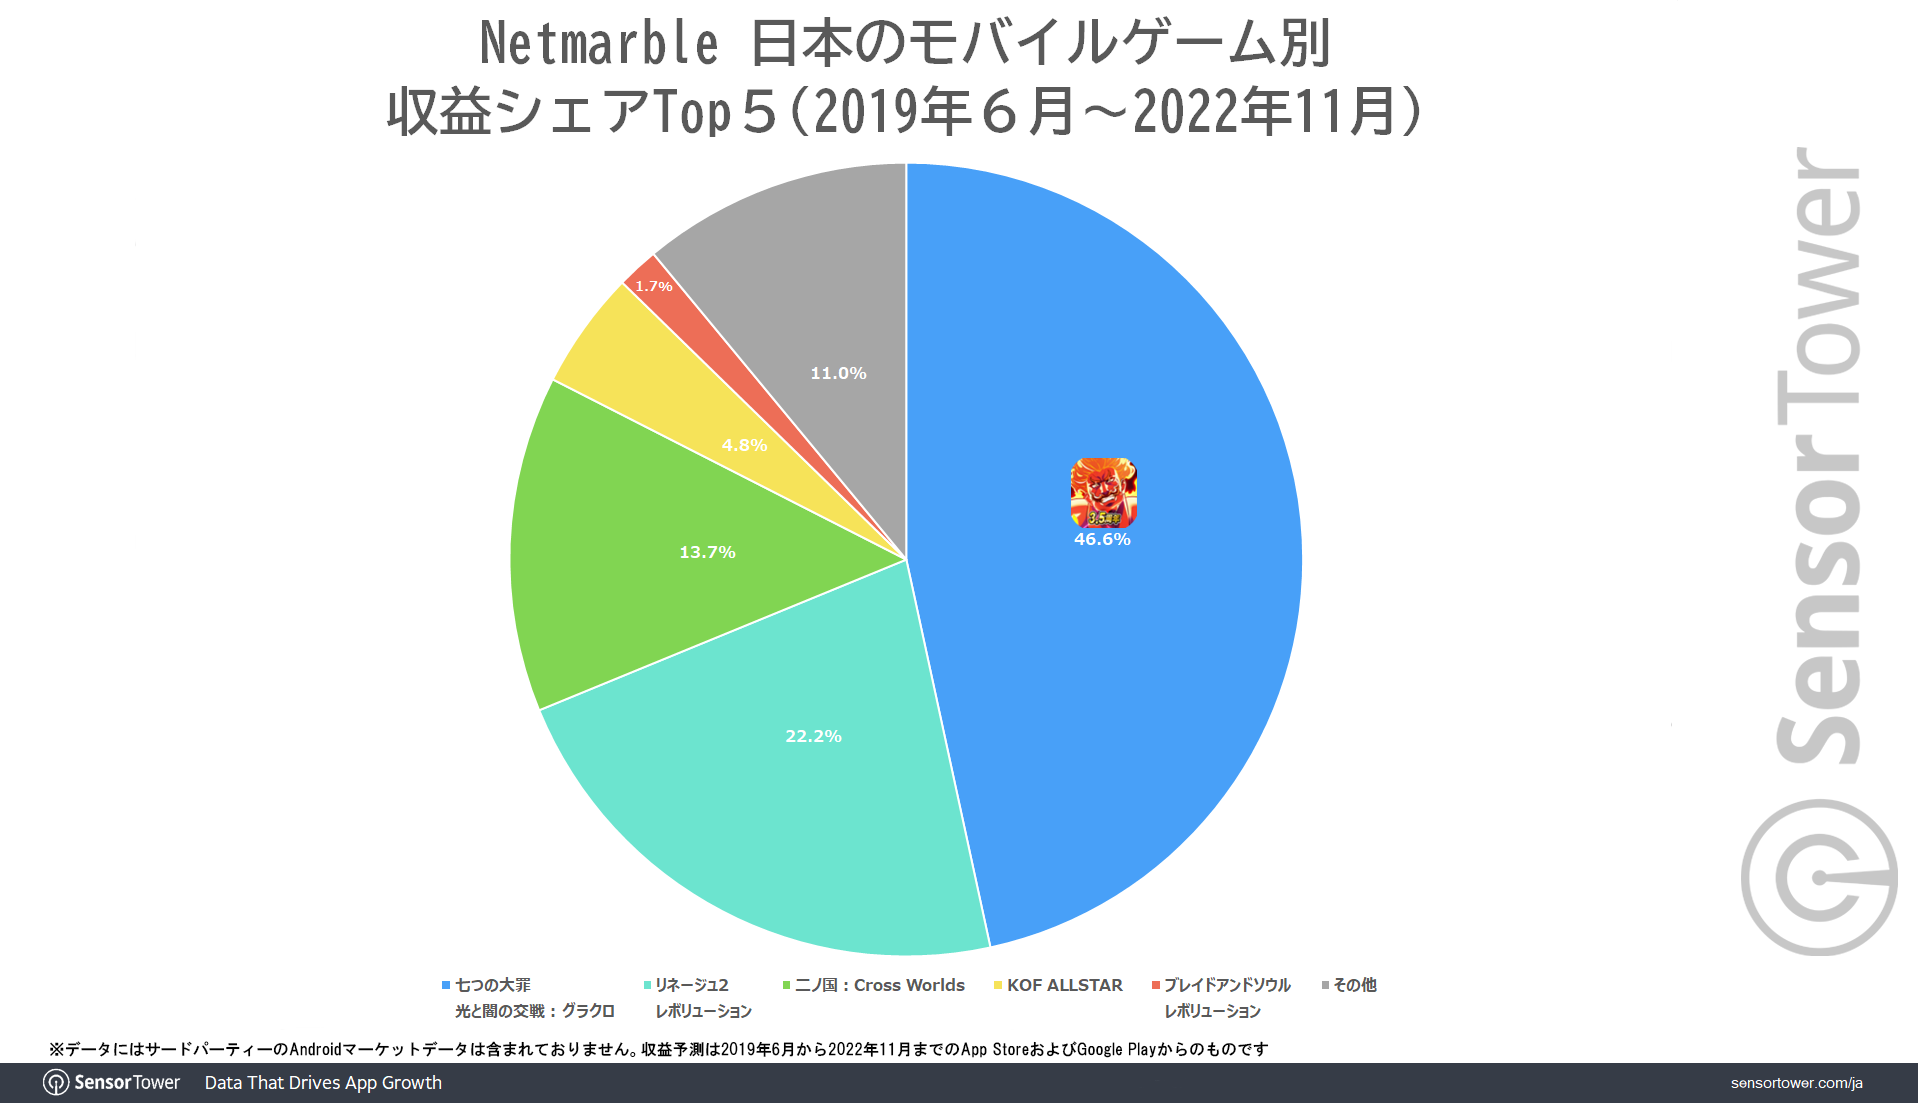 Netmarble-Share-by-games-Japan